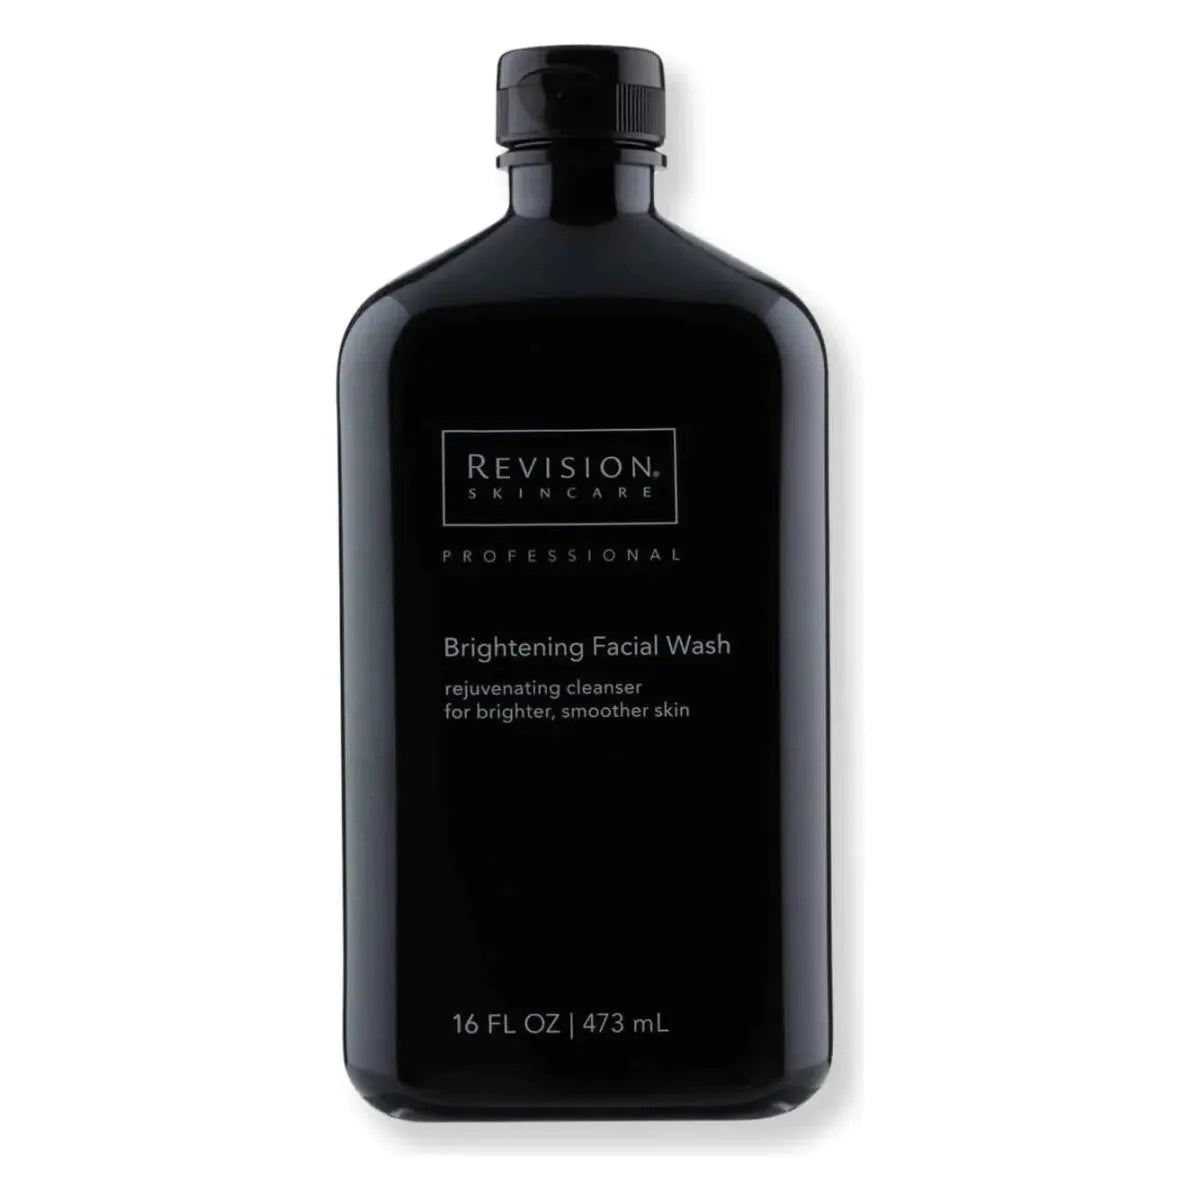 Revision Brightening Facial Wash Pro Size - 473 ml - Glam Global UK